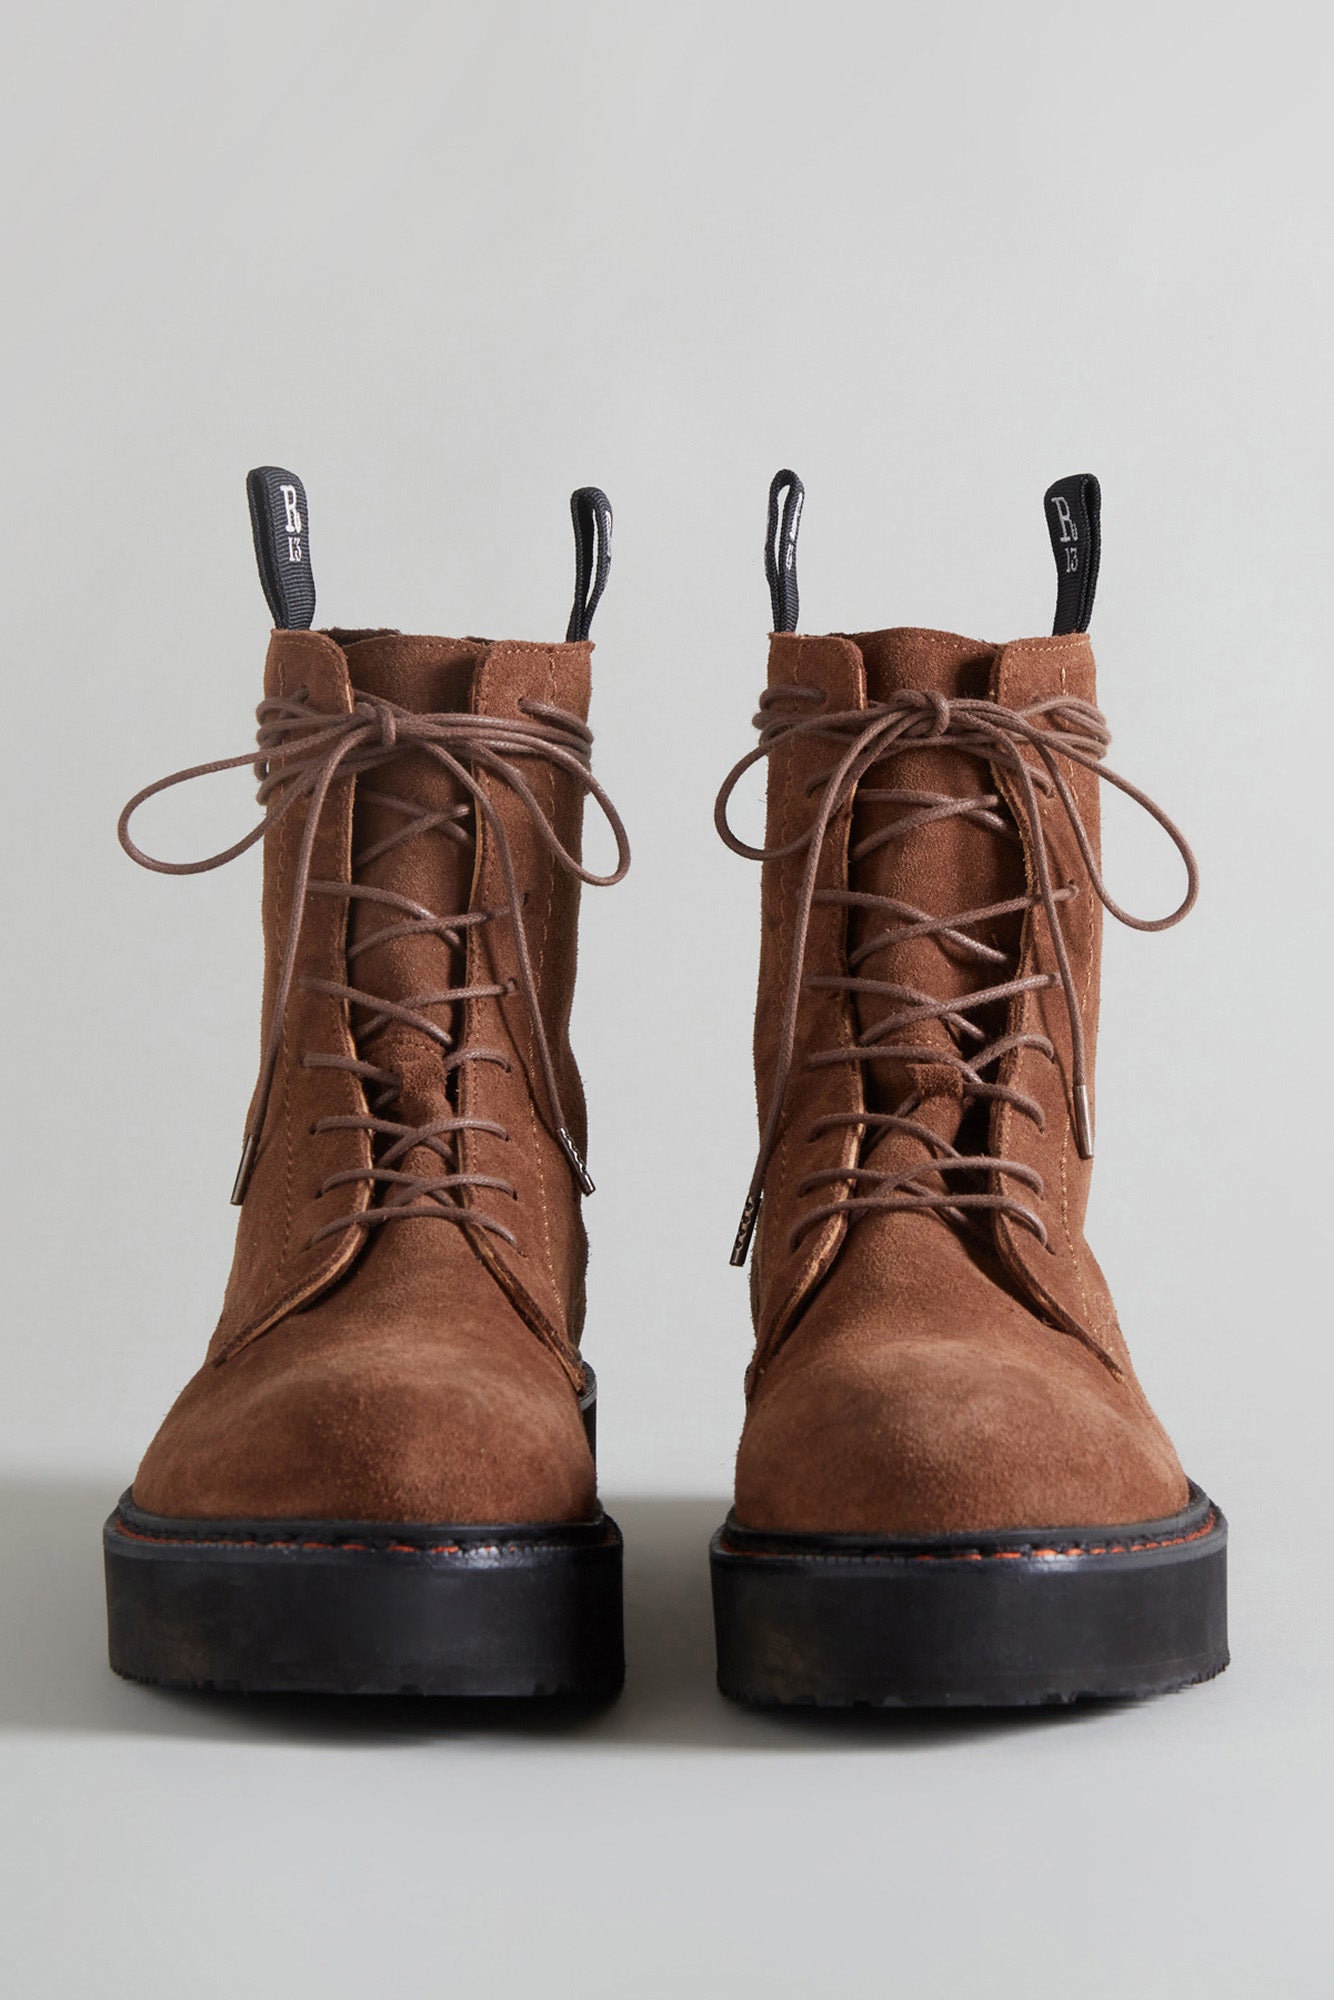 SINGLE STACK BOOT - BROWN SUEDE